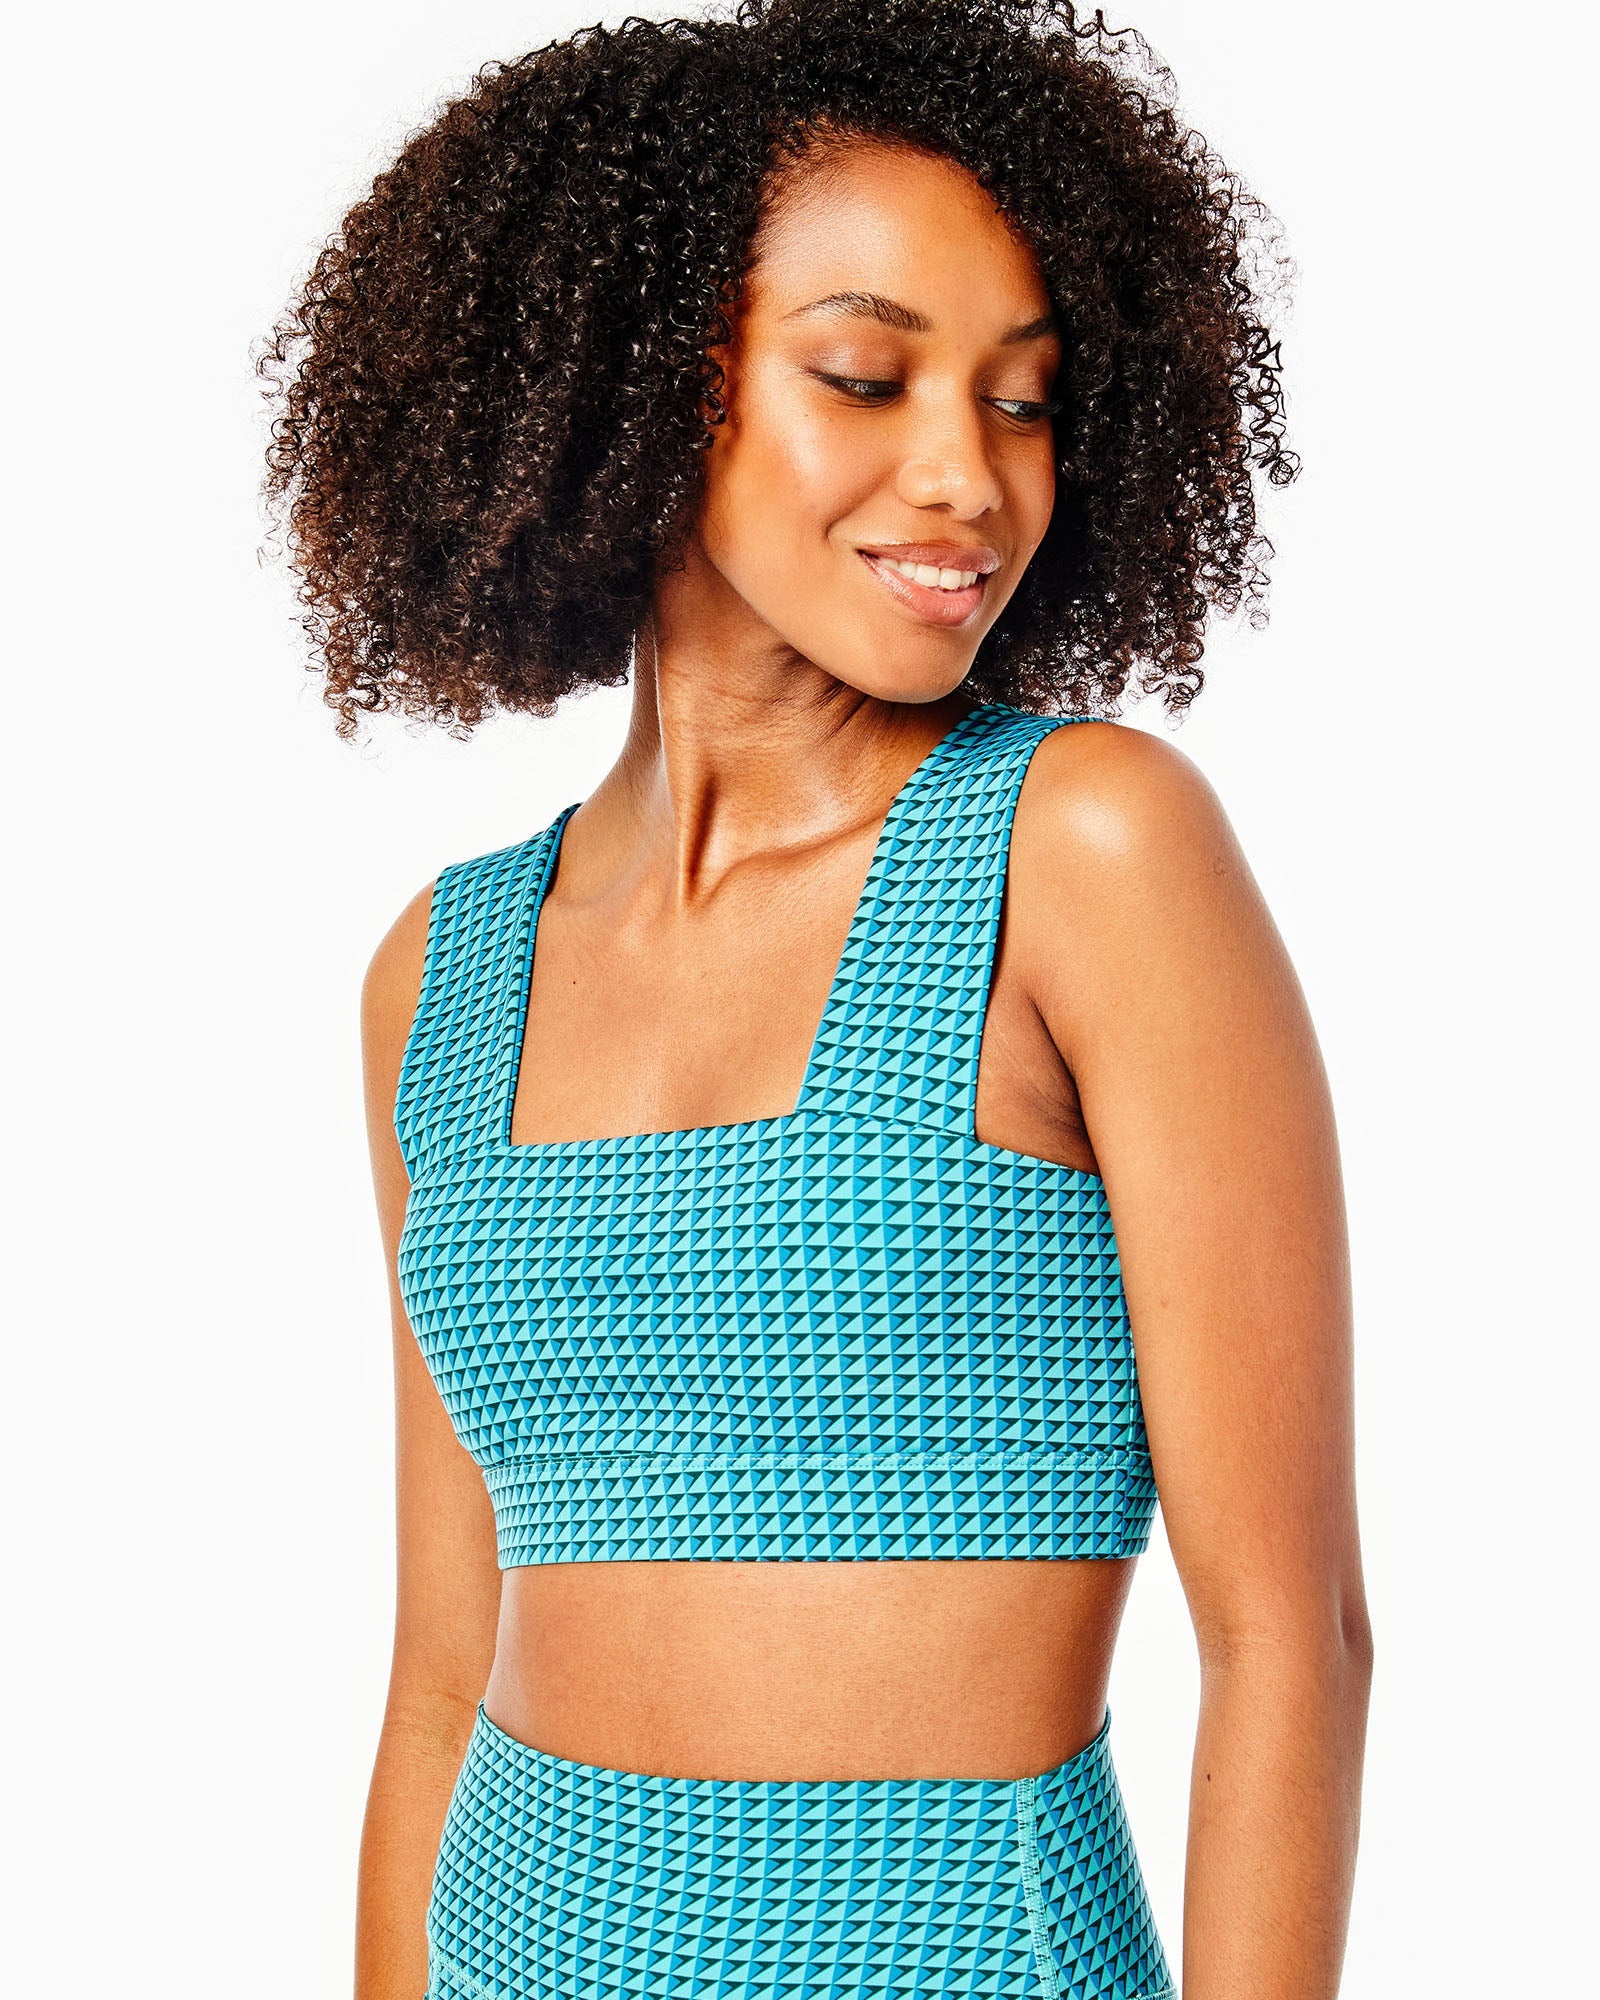 ADDISON BAY Moravian Sports Bra in Totally Teal Geo